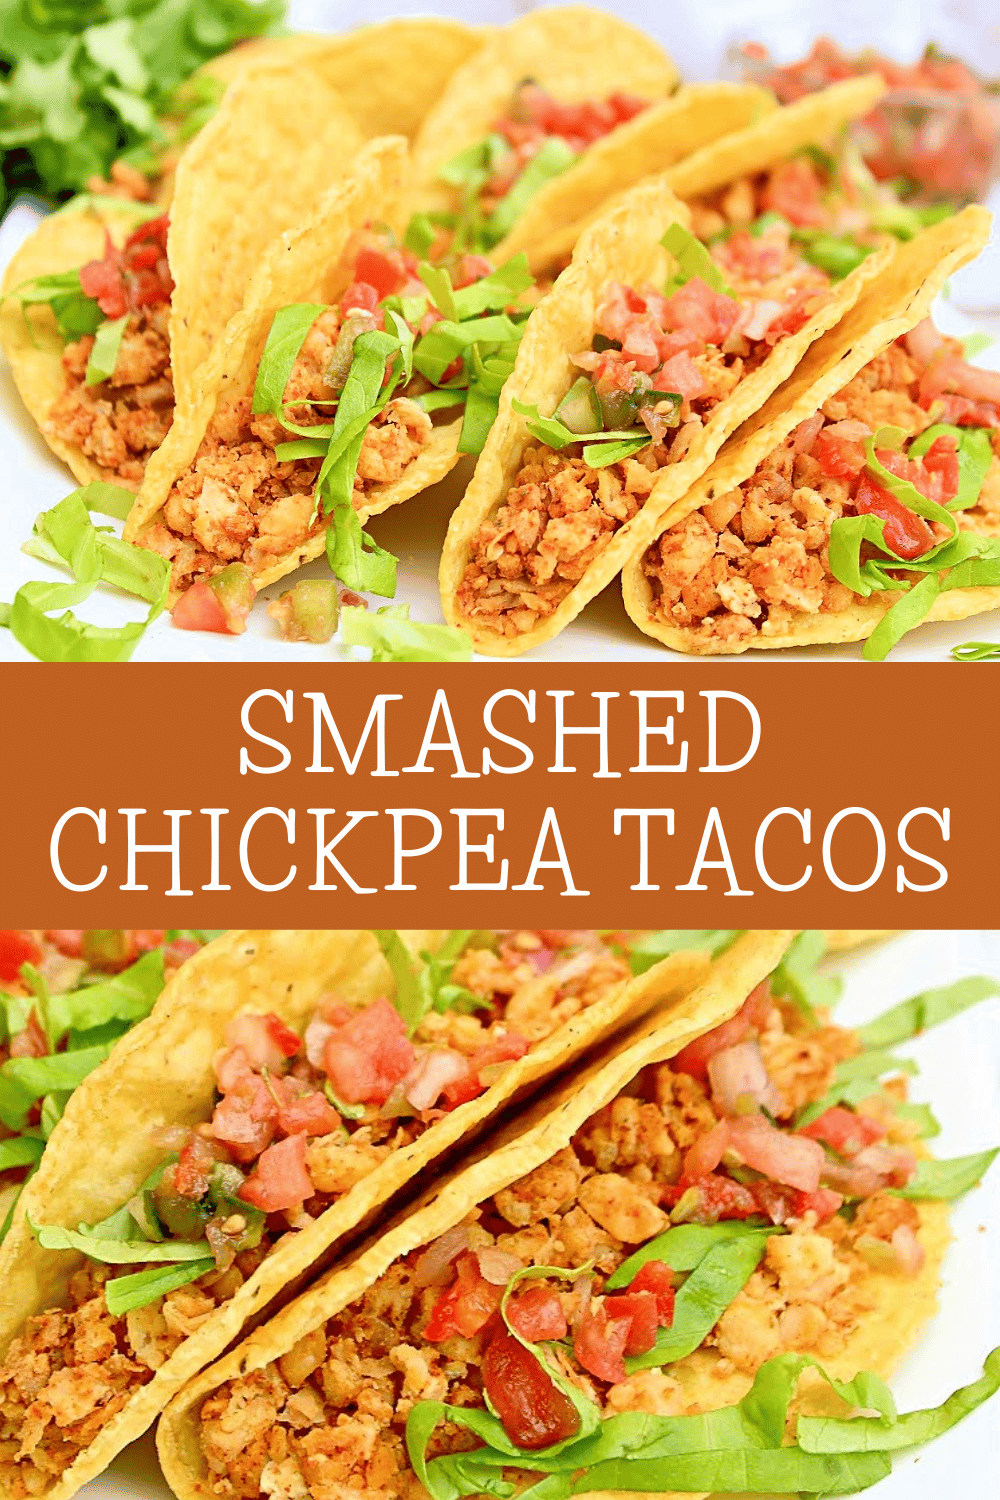 Chickpea Tacos ~ Smashed chickpea tacos are quick, easy, and seasoned with classic taco flavor! Ready to serve in 15 minutes! via @thiswifecooks